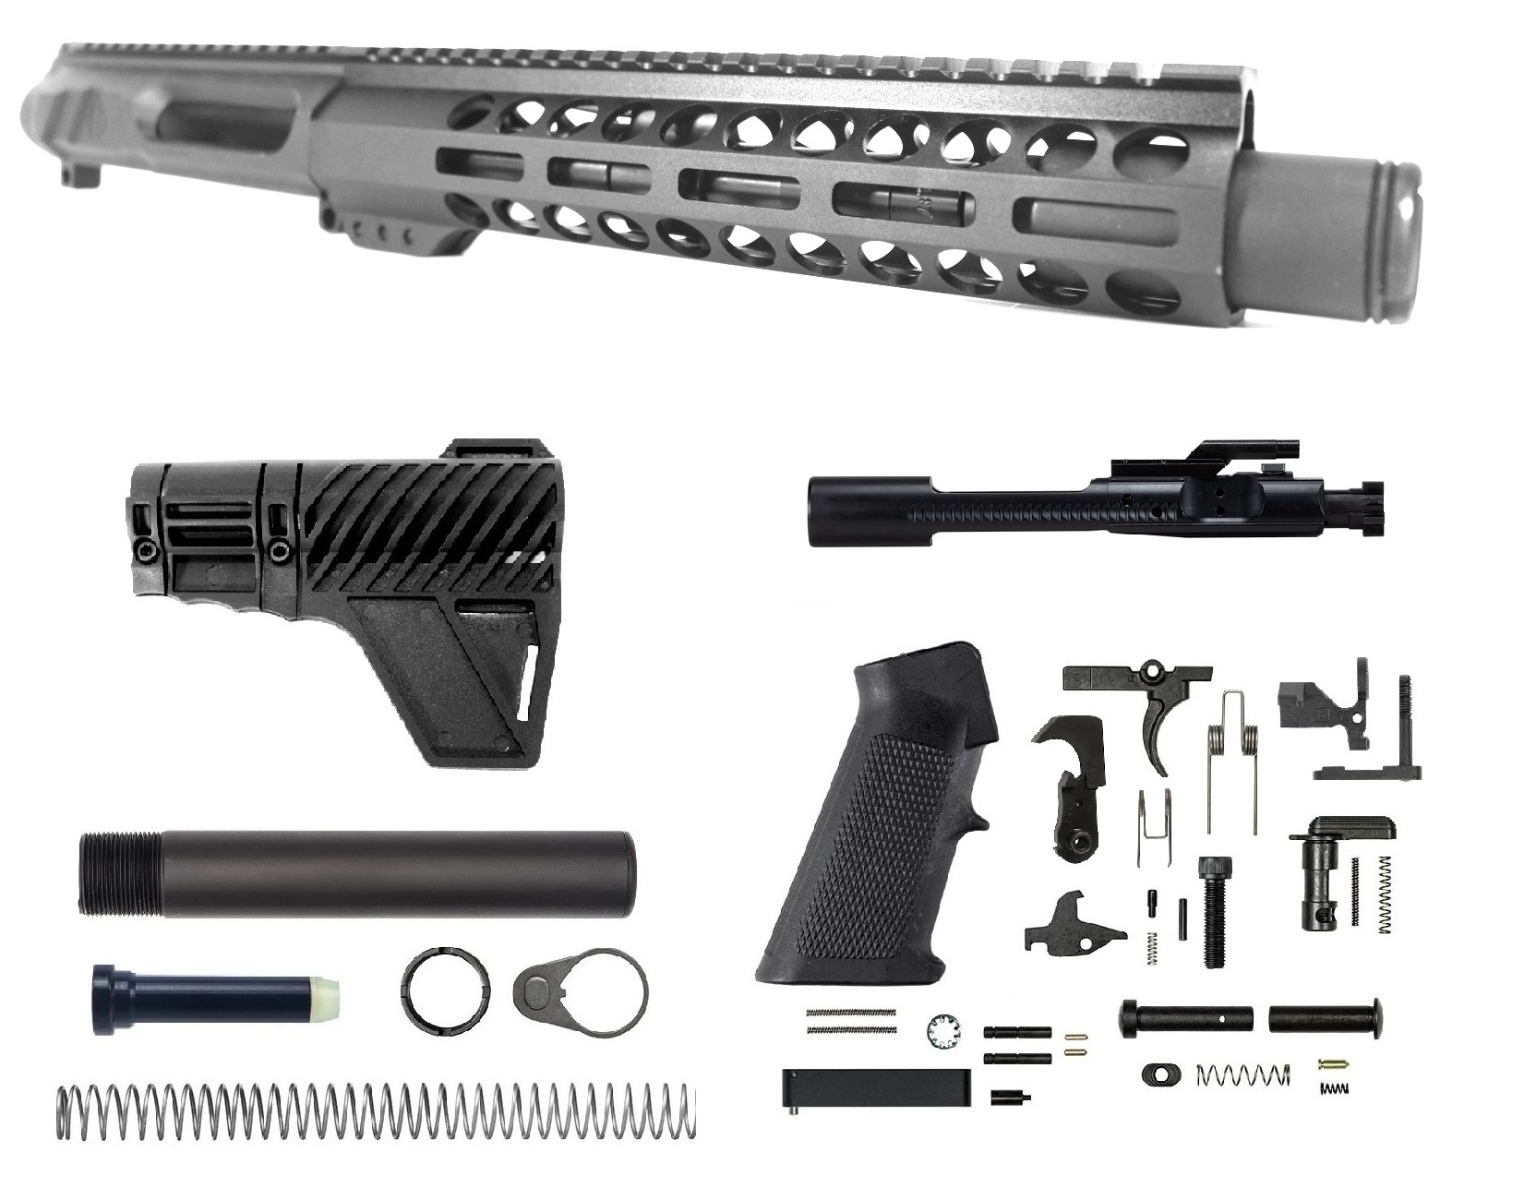 8.5 inch 300 Blackout AR-15 NR Side Charging Upper Kit | Pro2A Tactical